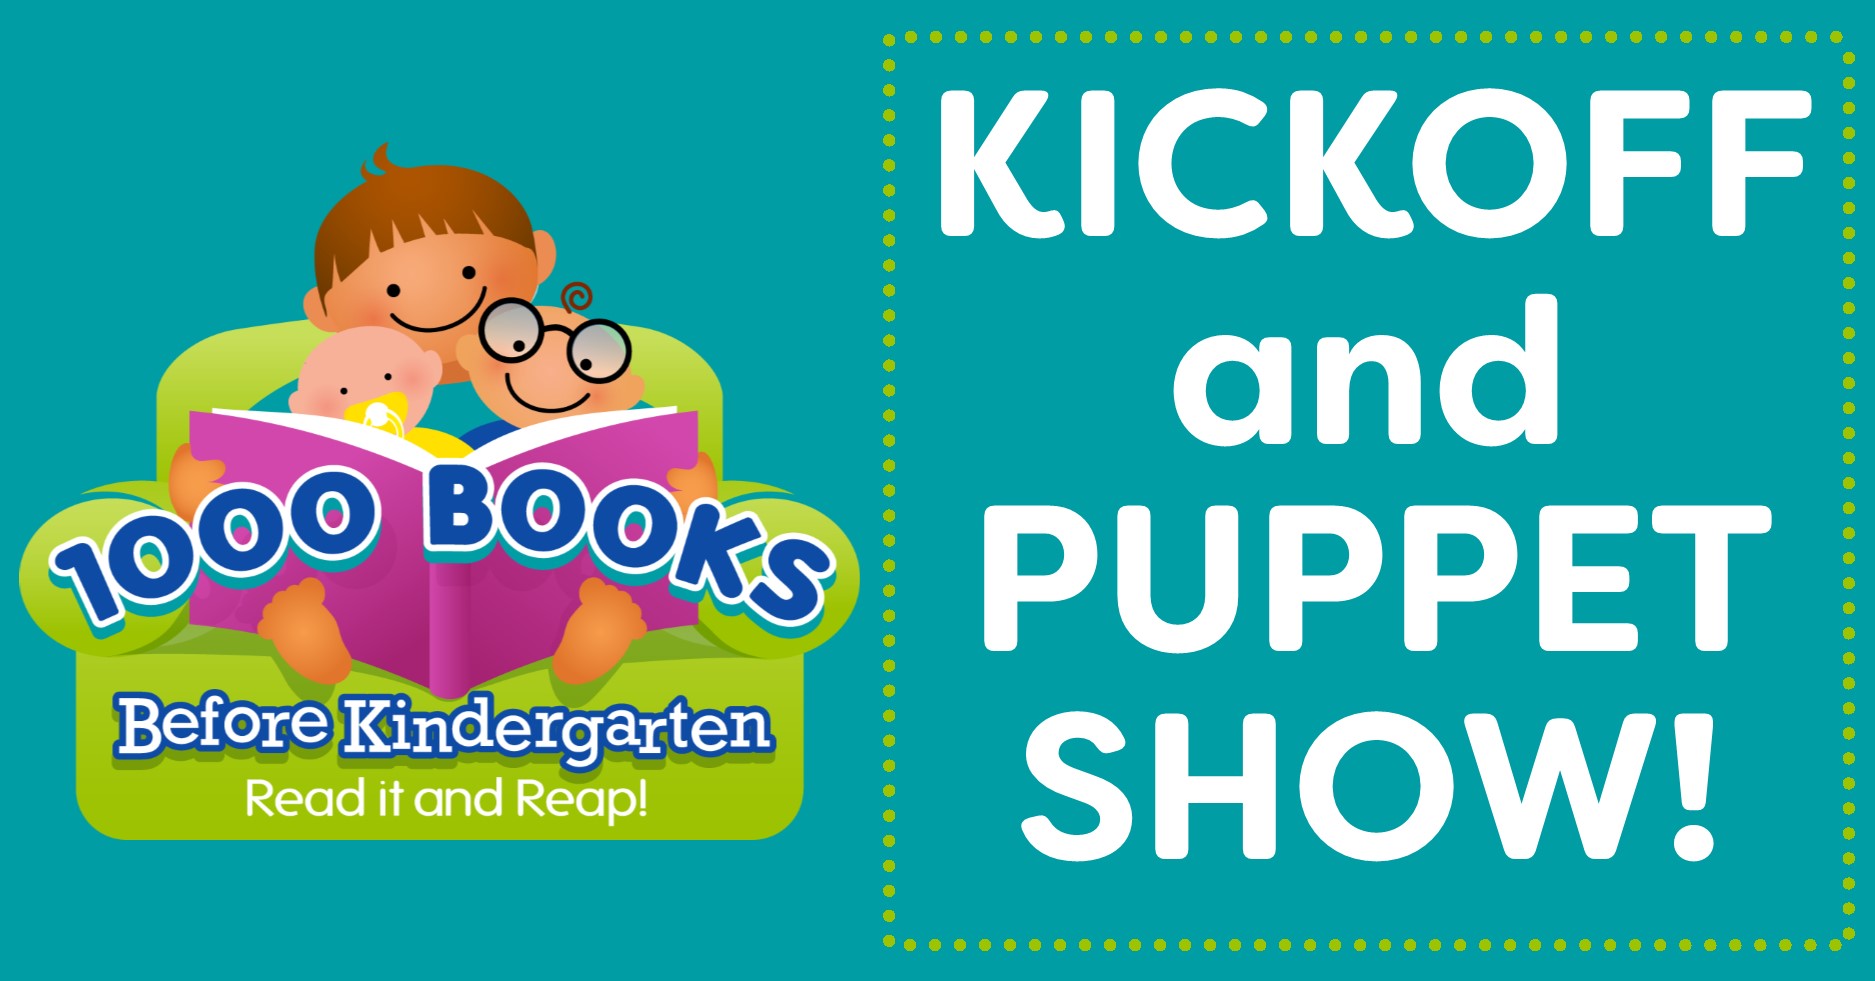 1000 Books Before Kindergarten Kickoff and Puppet Show